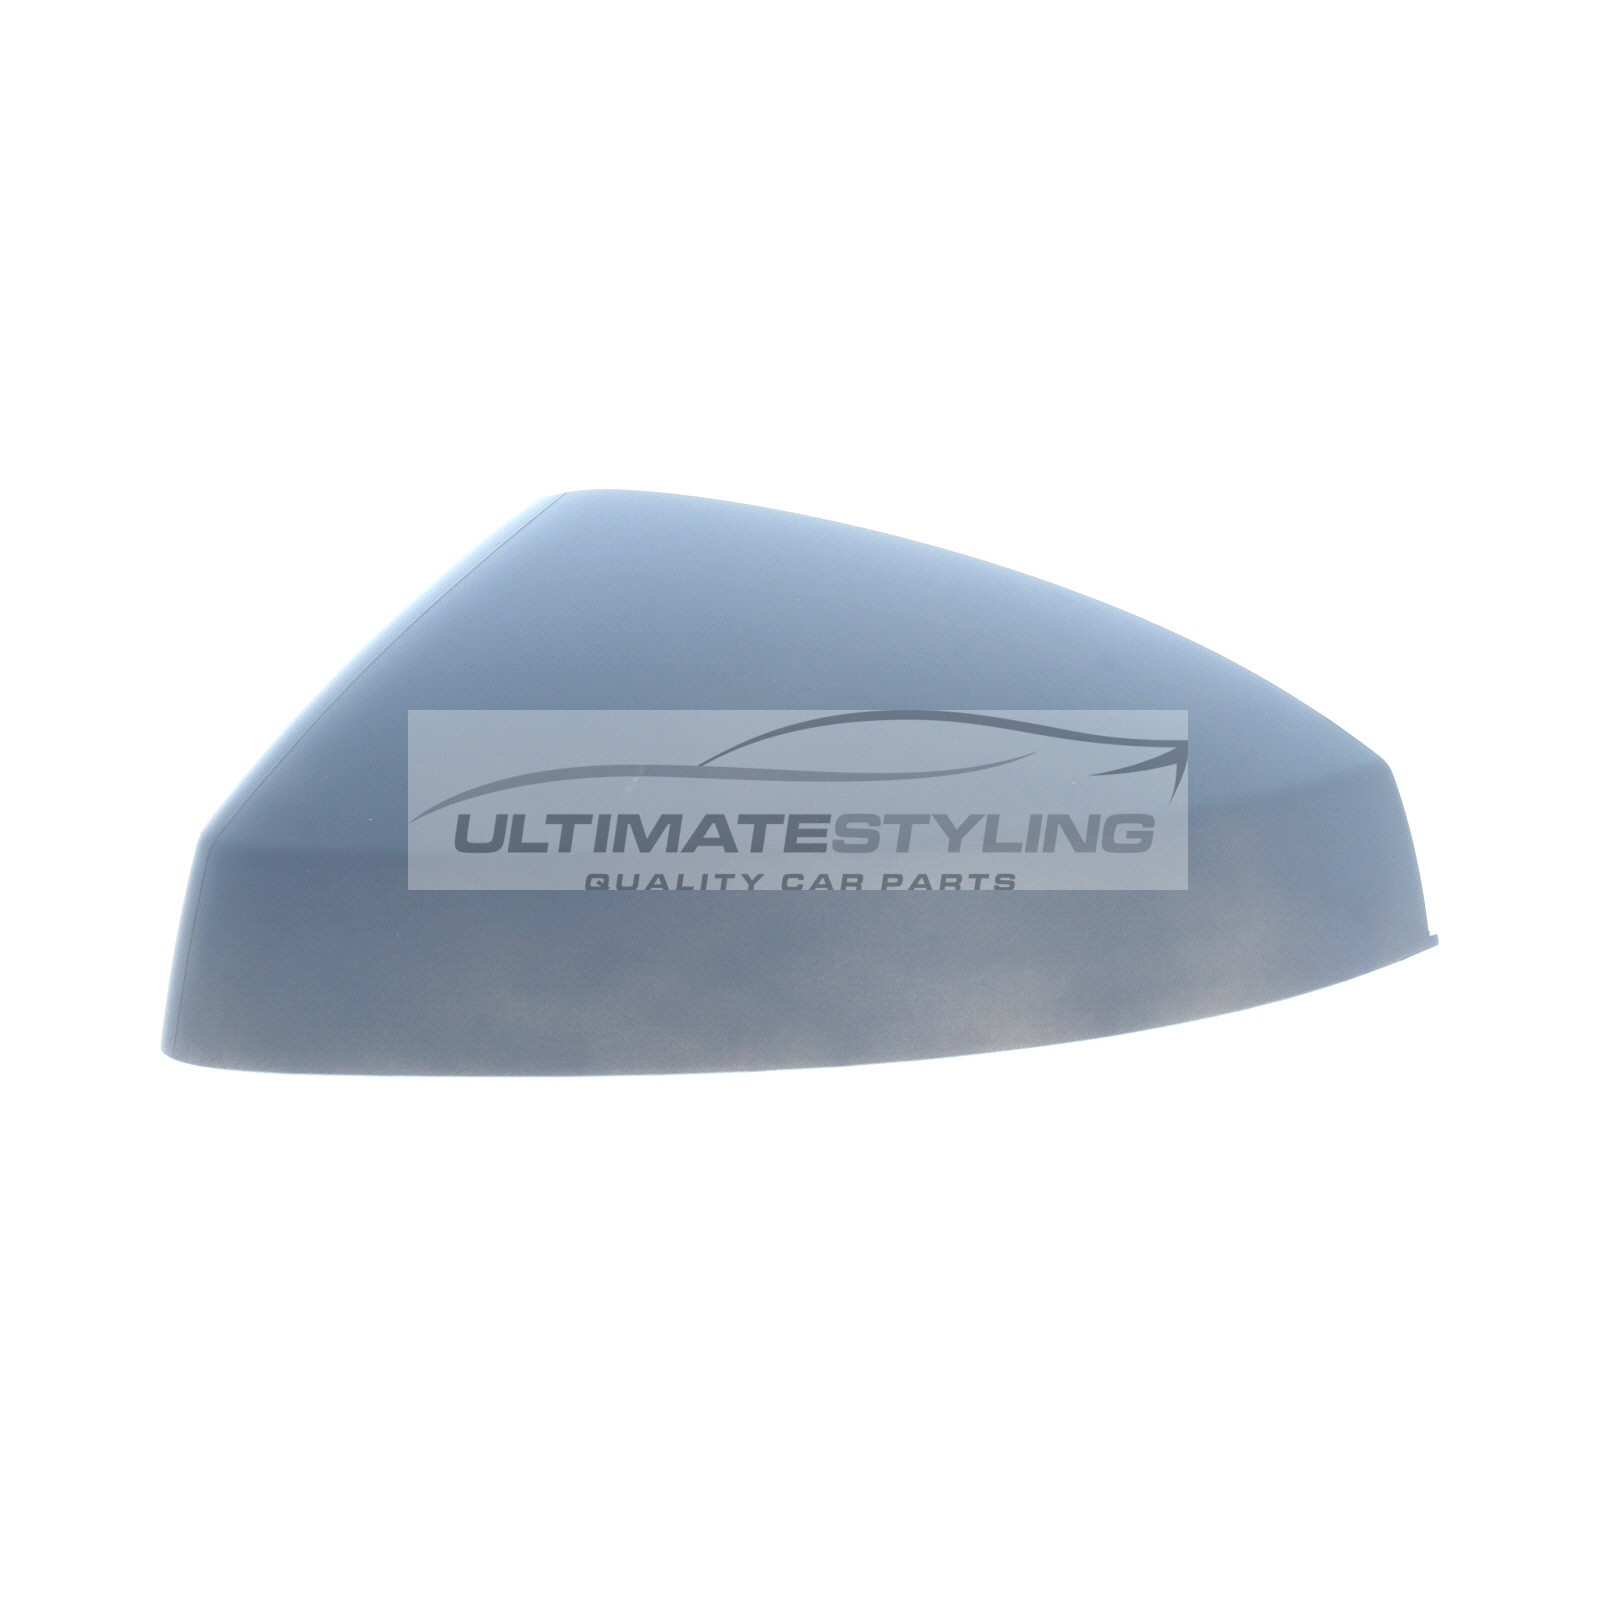 Audi S3 2013-2021, Audi A3 2012-2021, Audi RS3 2015-2021 Wing Mirror Cover Cap Casing Primed Passenger Side (LH) Excludes Aperture for Side Assist Indicator